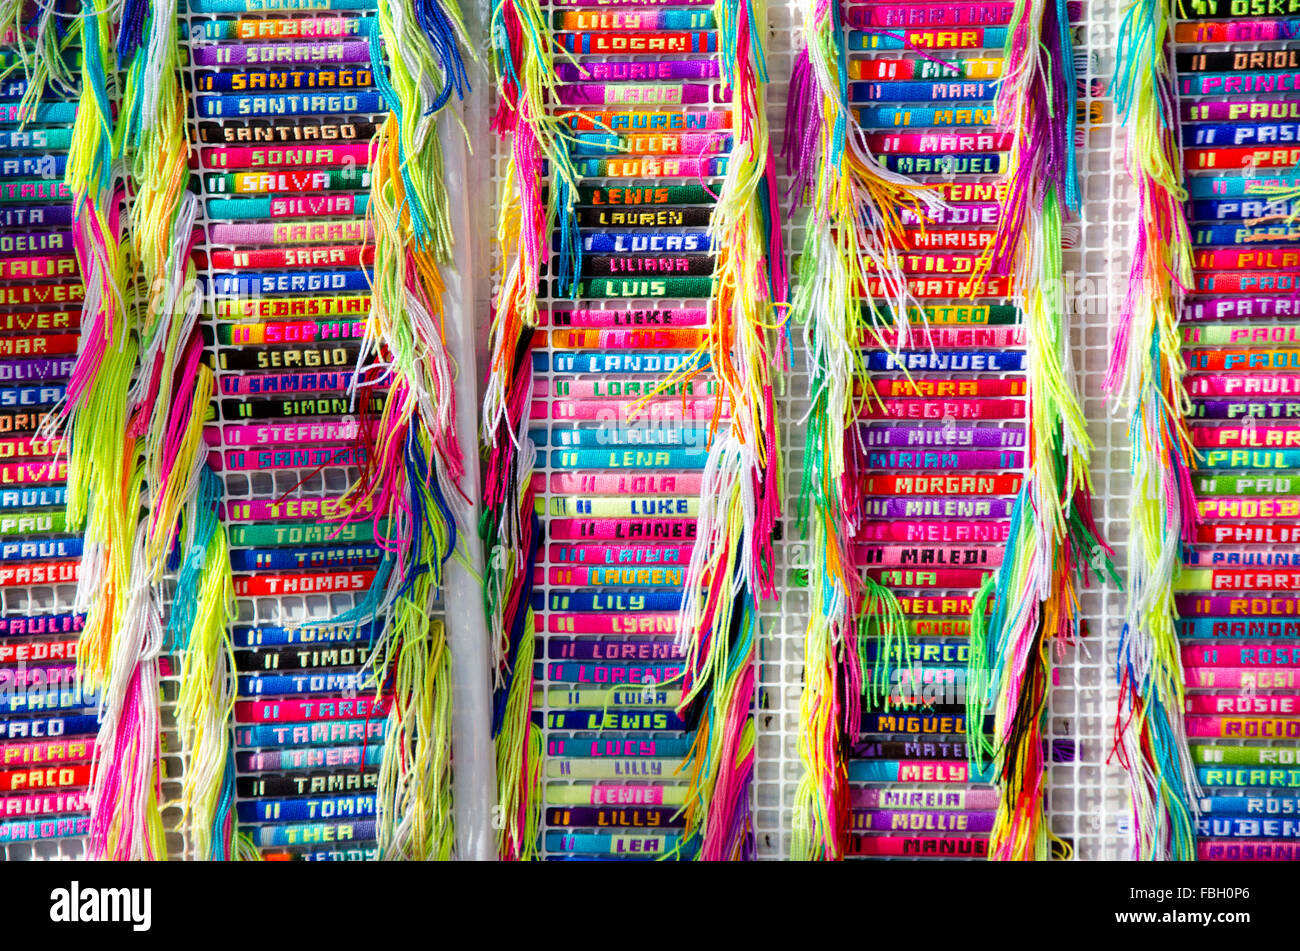 Woven braclets embroidered with names for sale in weekly market in Benidorm, Alicante, Spain Stock Photo